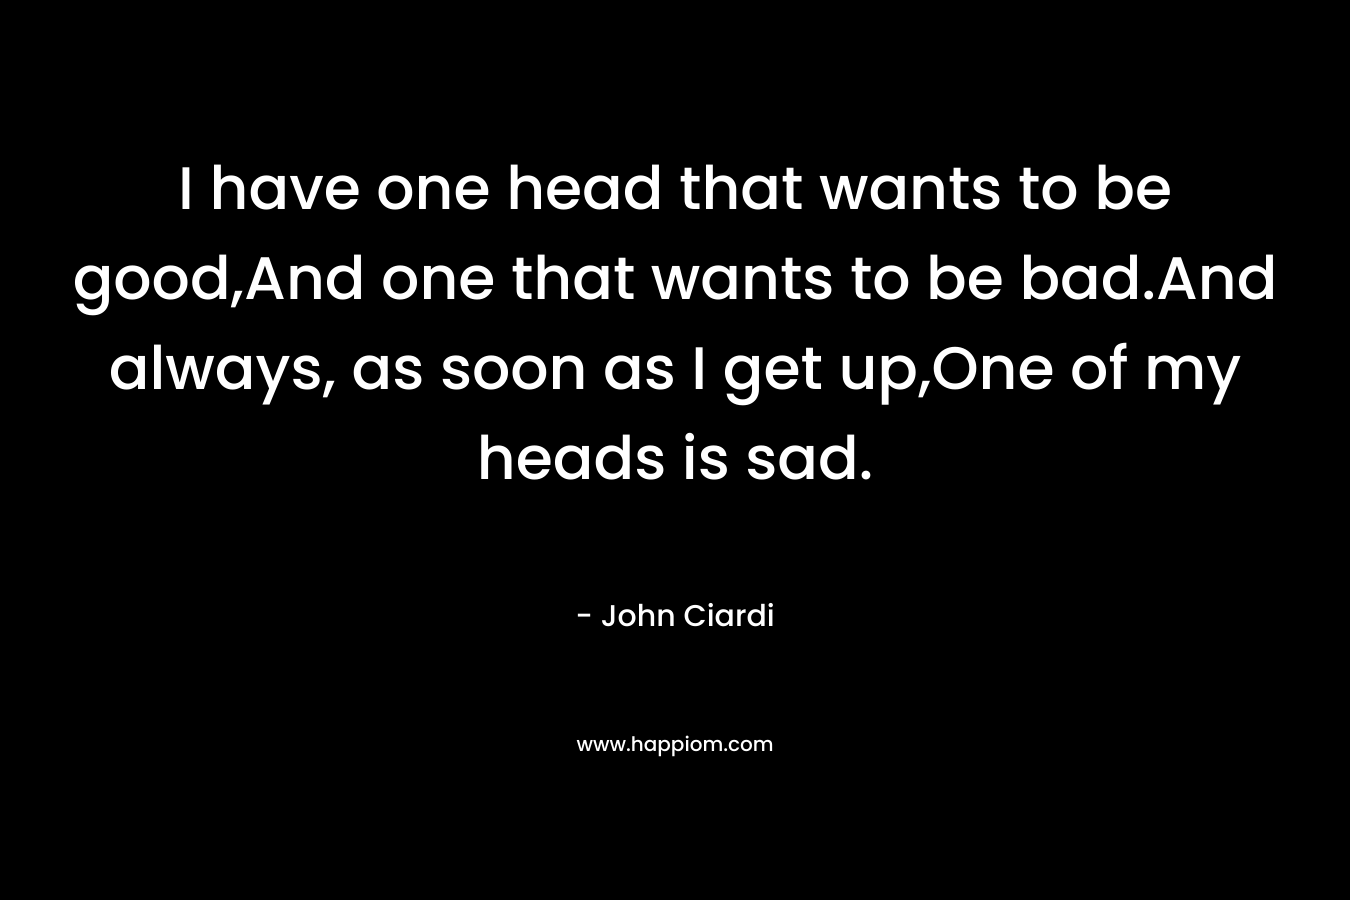 I have one head that wants to be good,And one that wants to be bad.And always, as soon as I get up,One of my heads is sad.